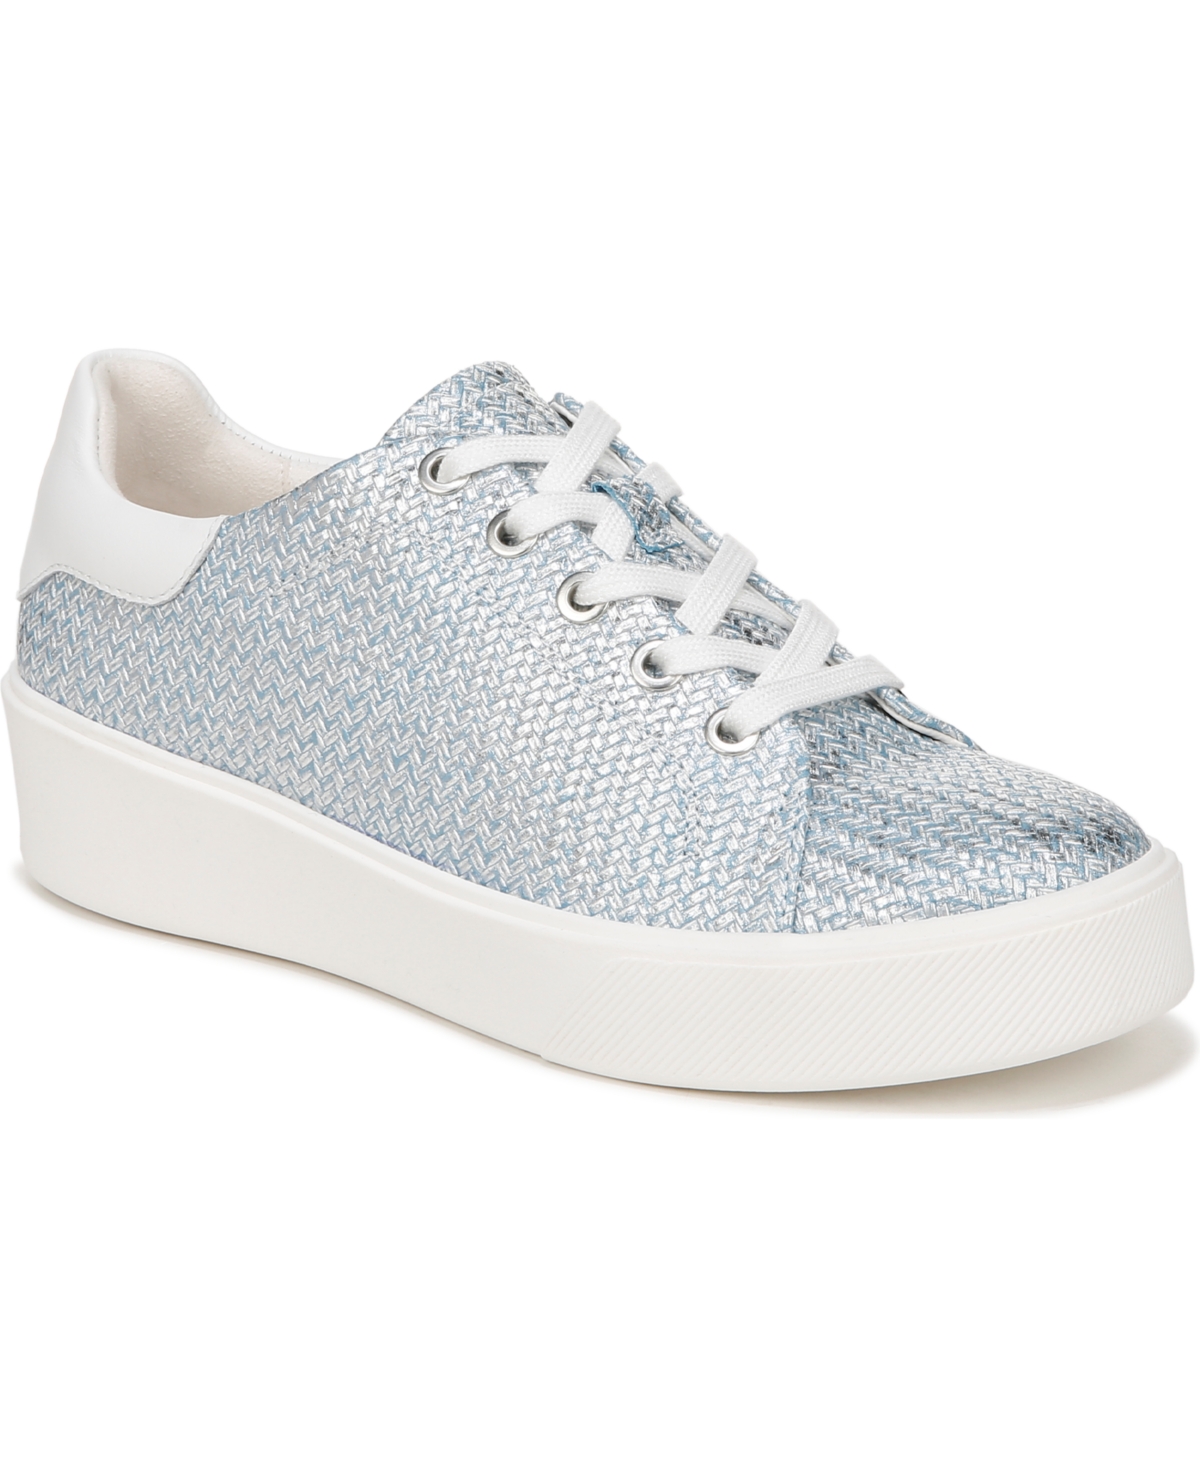 Morrison 2.0 Sneakers - Metallic Blue Woven Embossed Leather